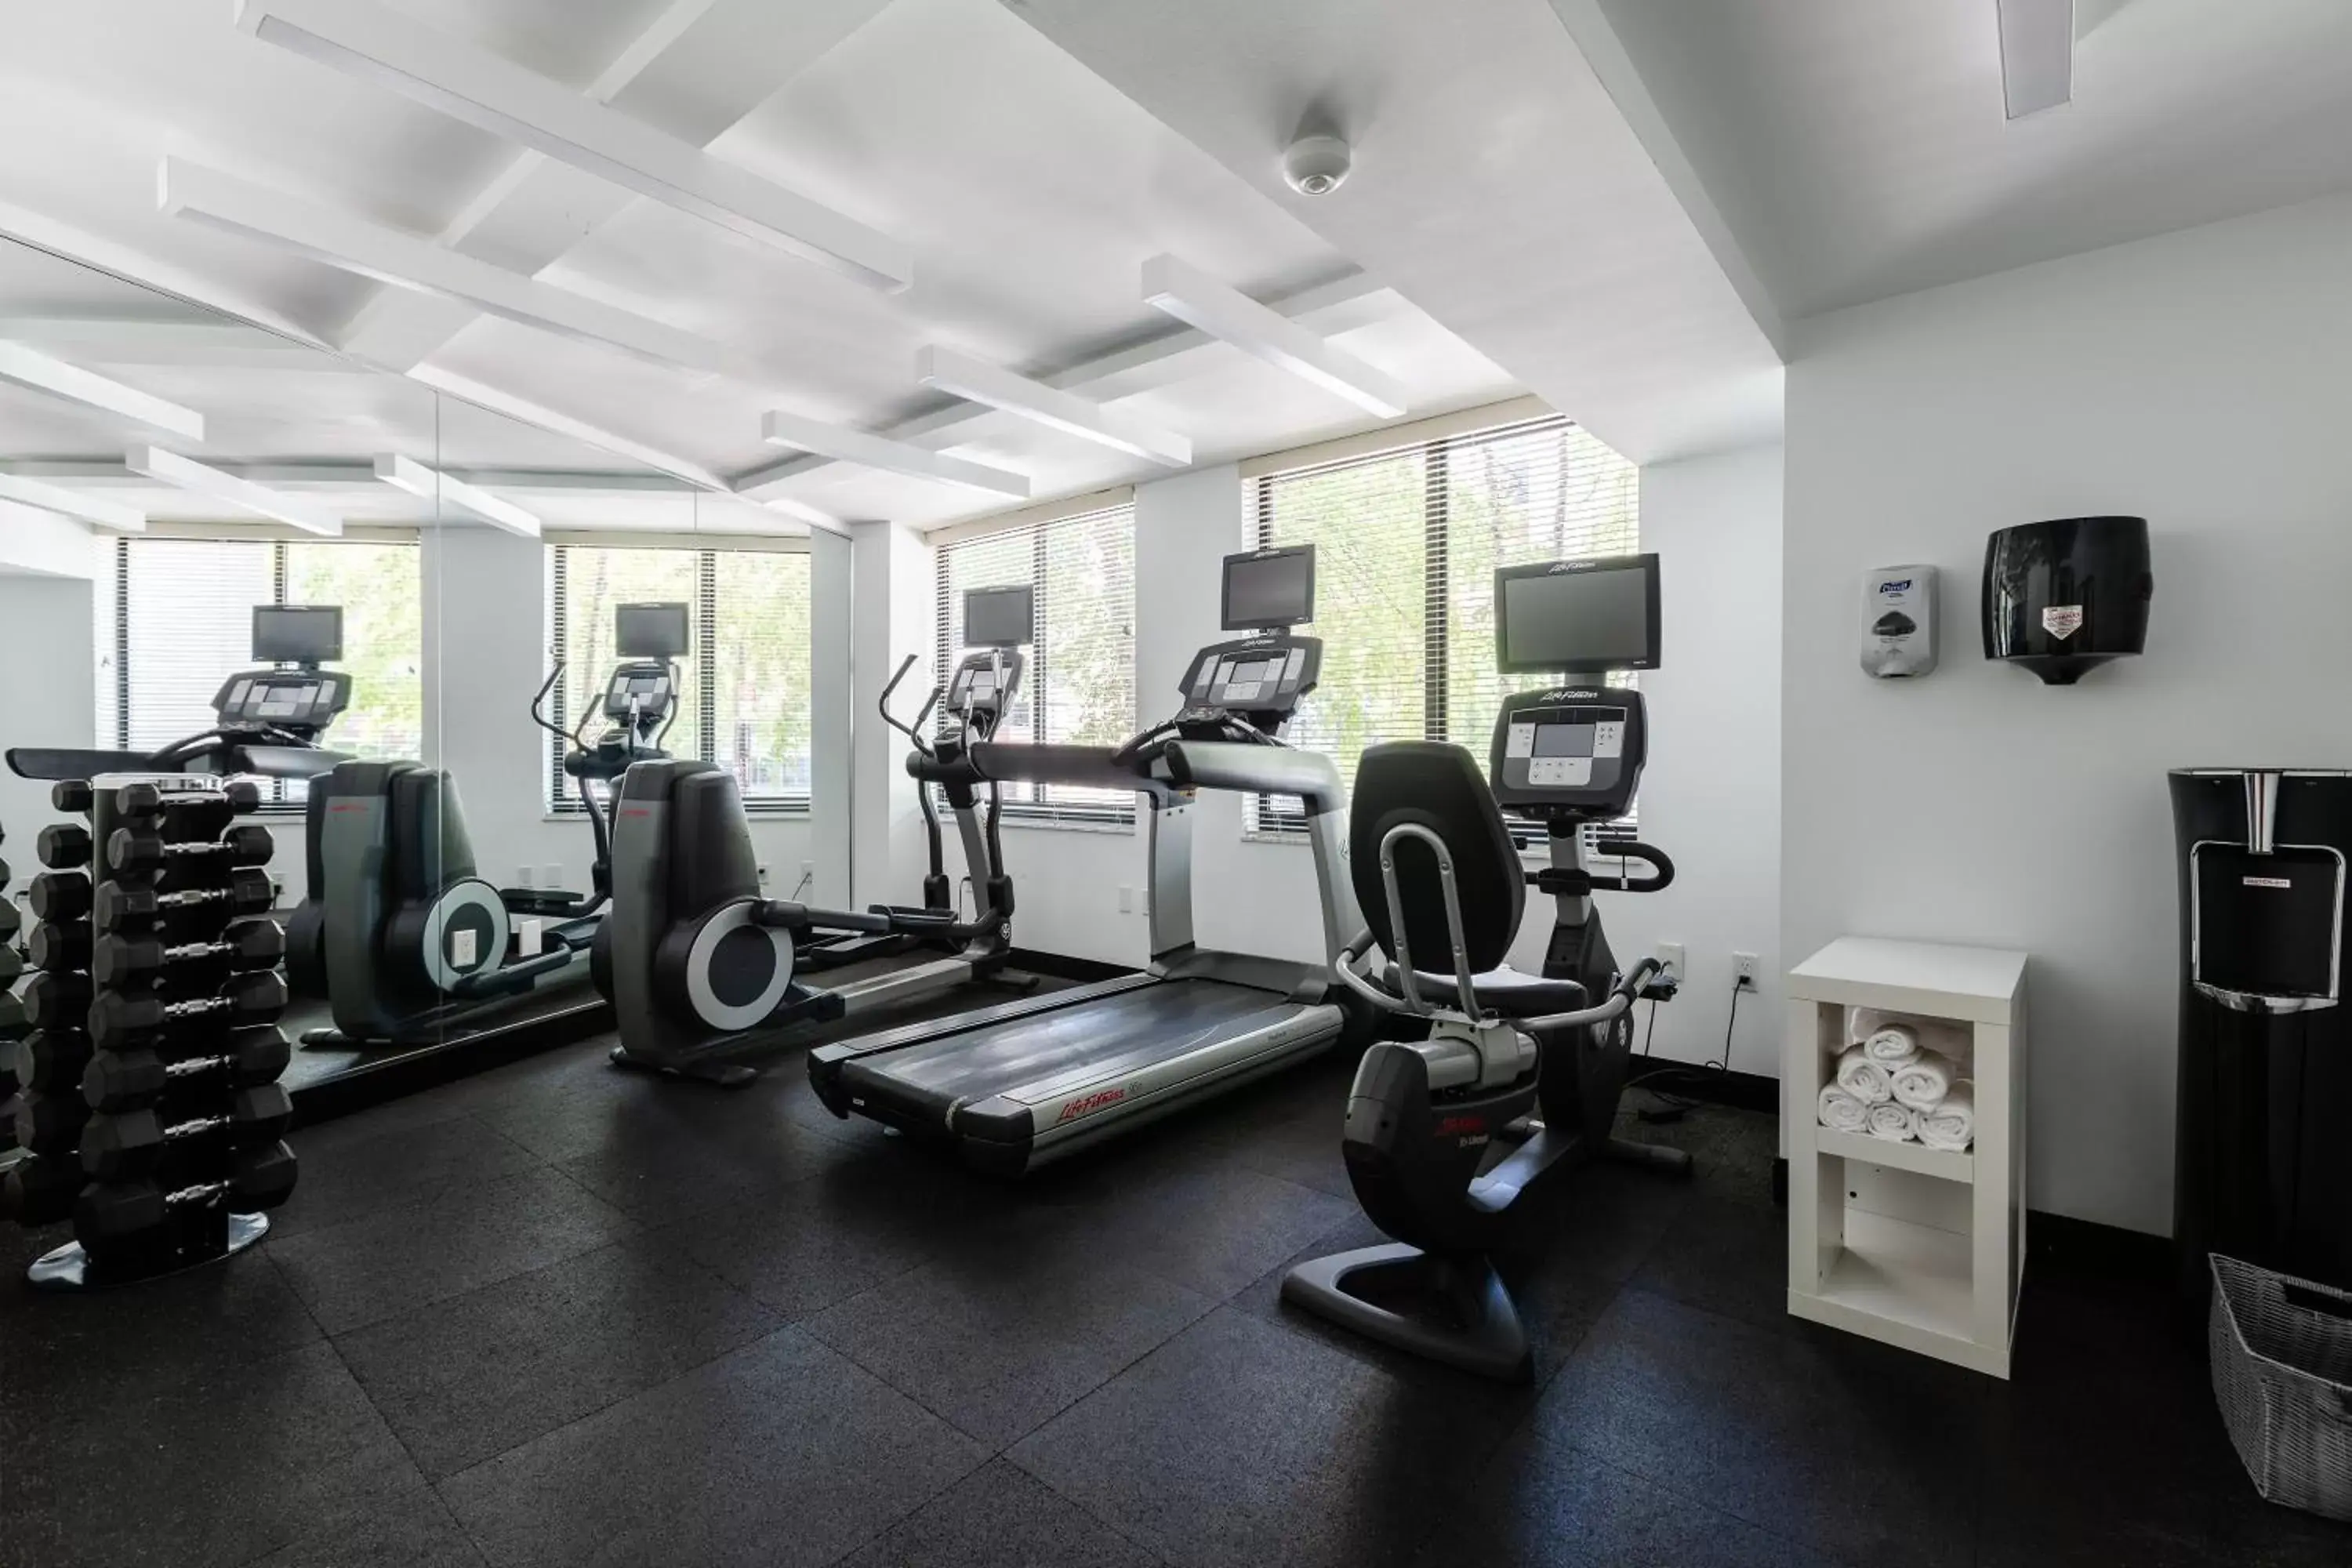 Fitness centre/facilities, Fitness Center/Facilities in 2500 Penn, a Placemakr Experience